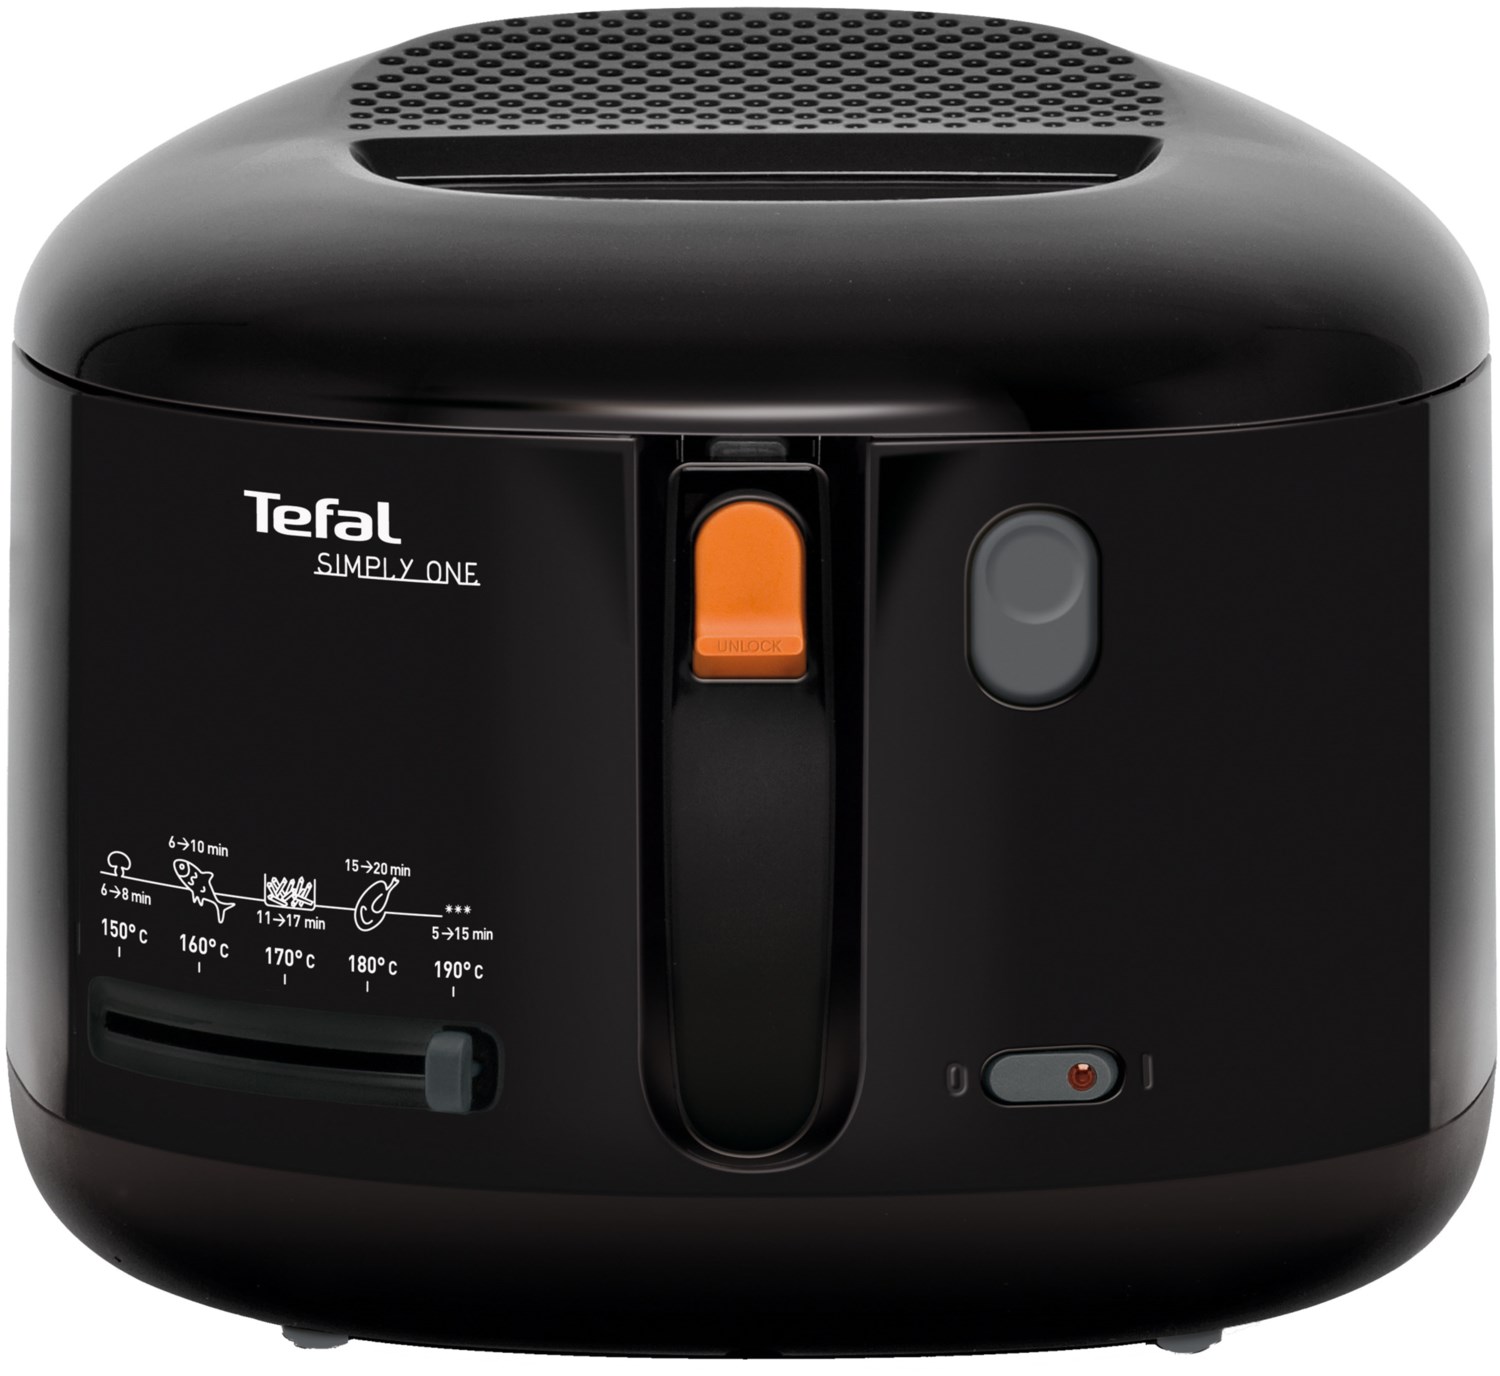 FF1608 Simply One Fritteuse schwarz von Tefal